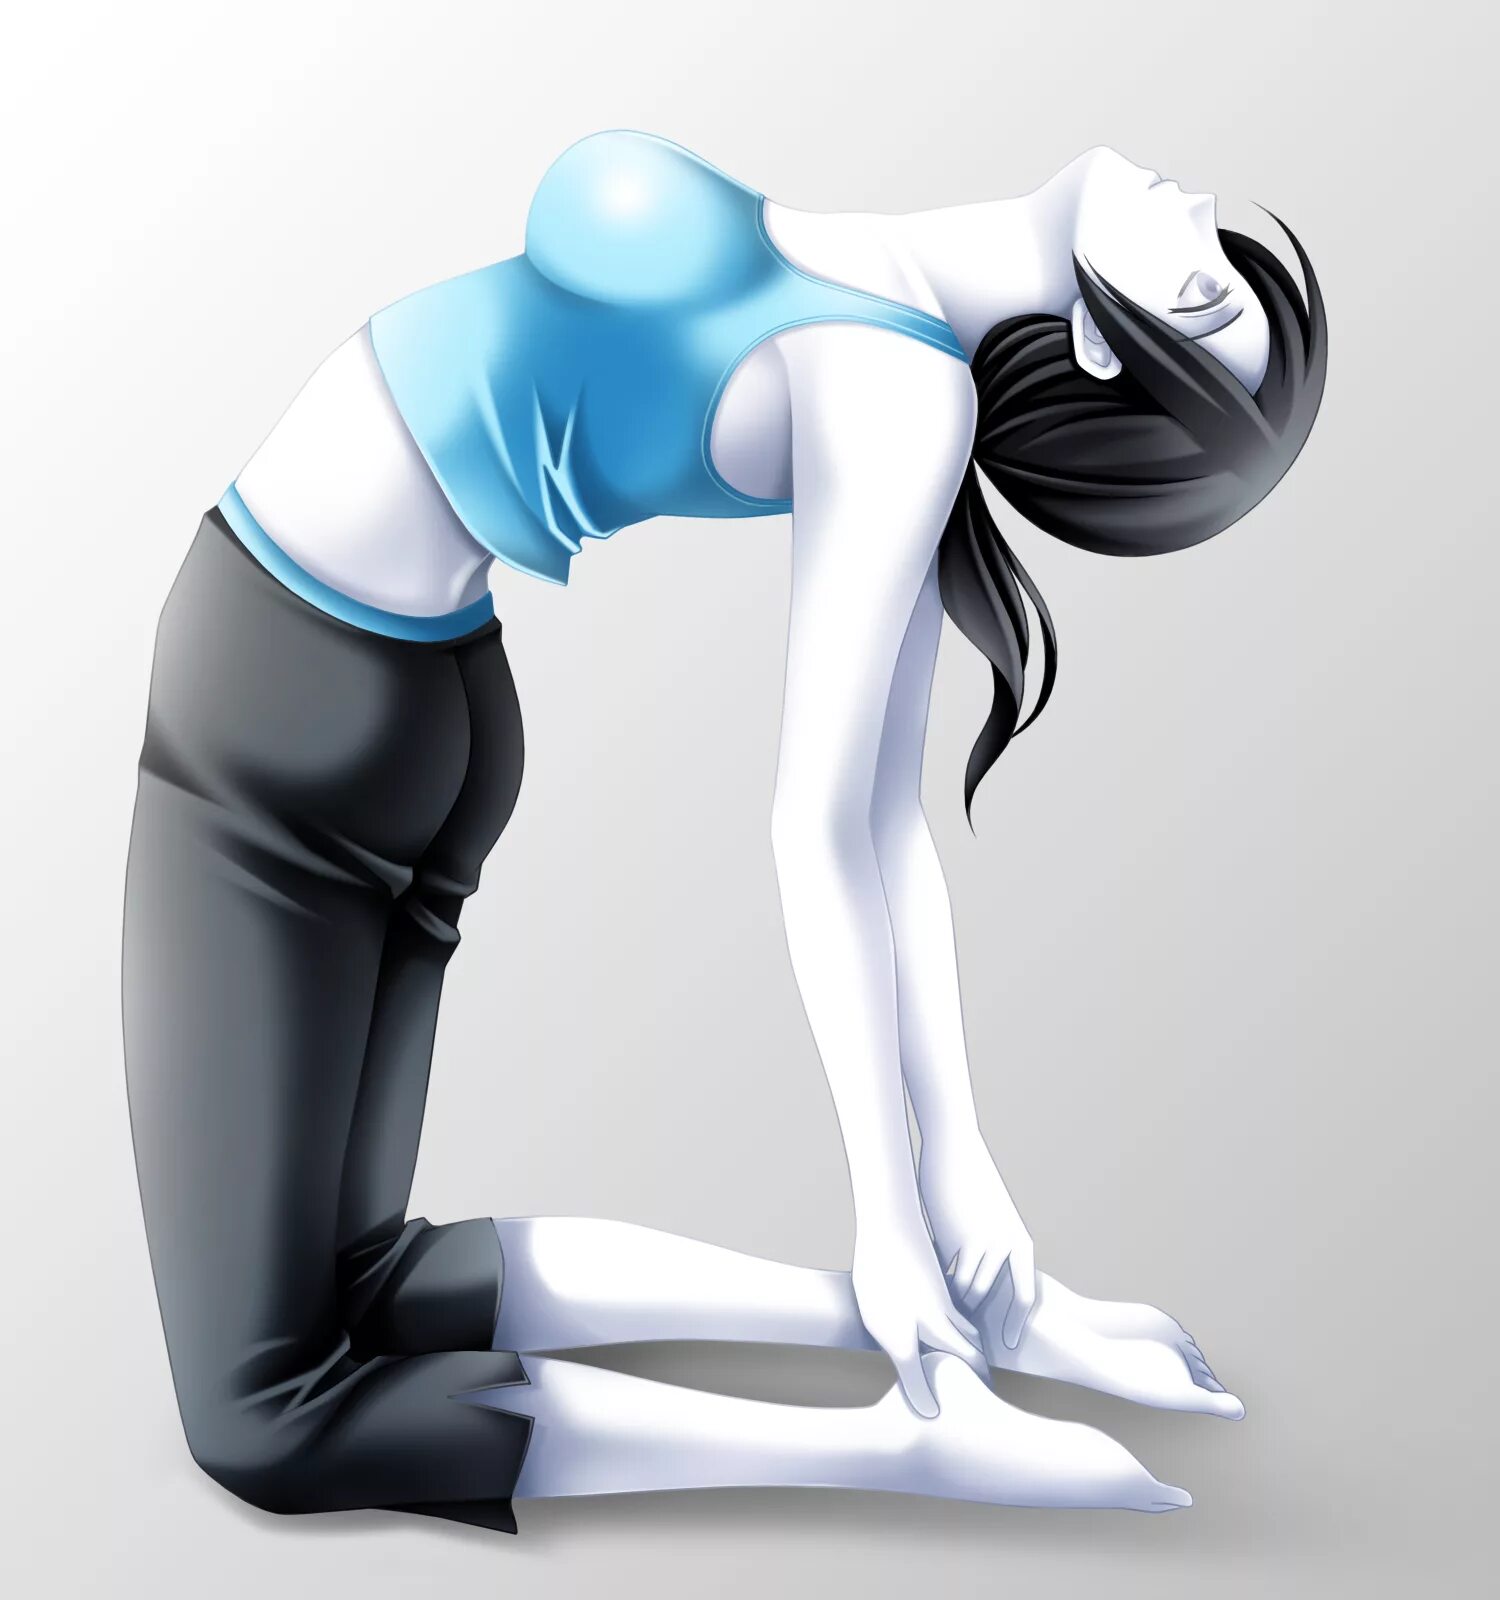 Wii fit. Nintendo Wii Fit Trainer. Wii Fit Trainer 34. Wii Fit Trainer Smash.